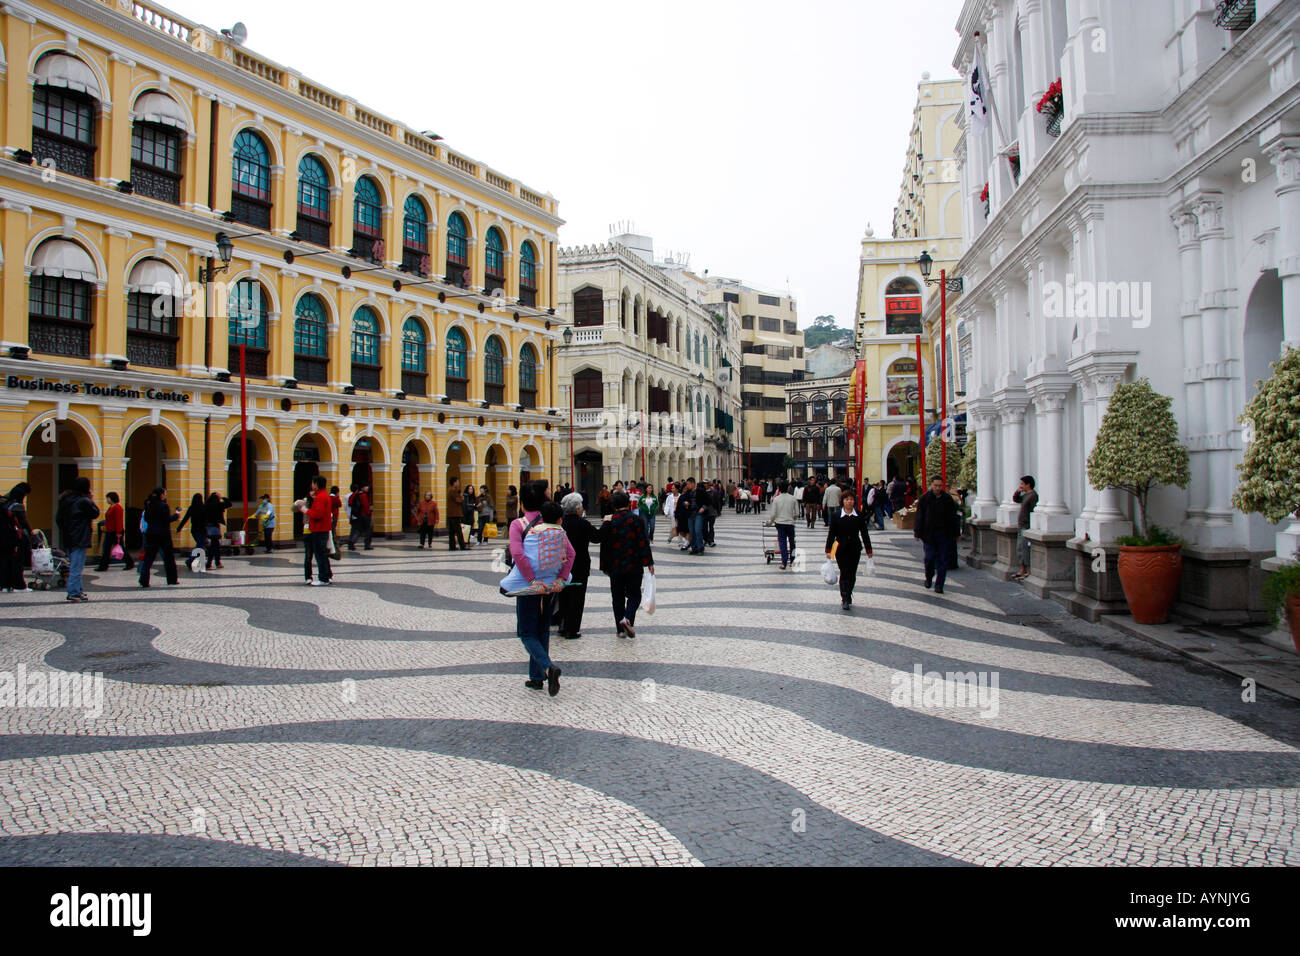 SENADO SQUARE WITH TRADITIONAL SWIRLING BLACK AND WHITE PAVING IS THE FOCAL POINT OF THE HISTORIC PORTUGUESE CENTRE OF MACAU Stock Photo